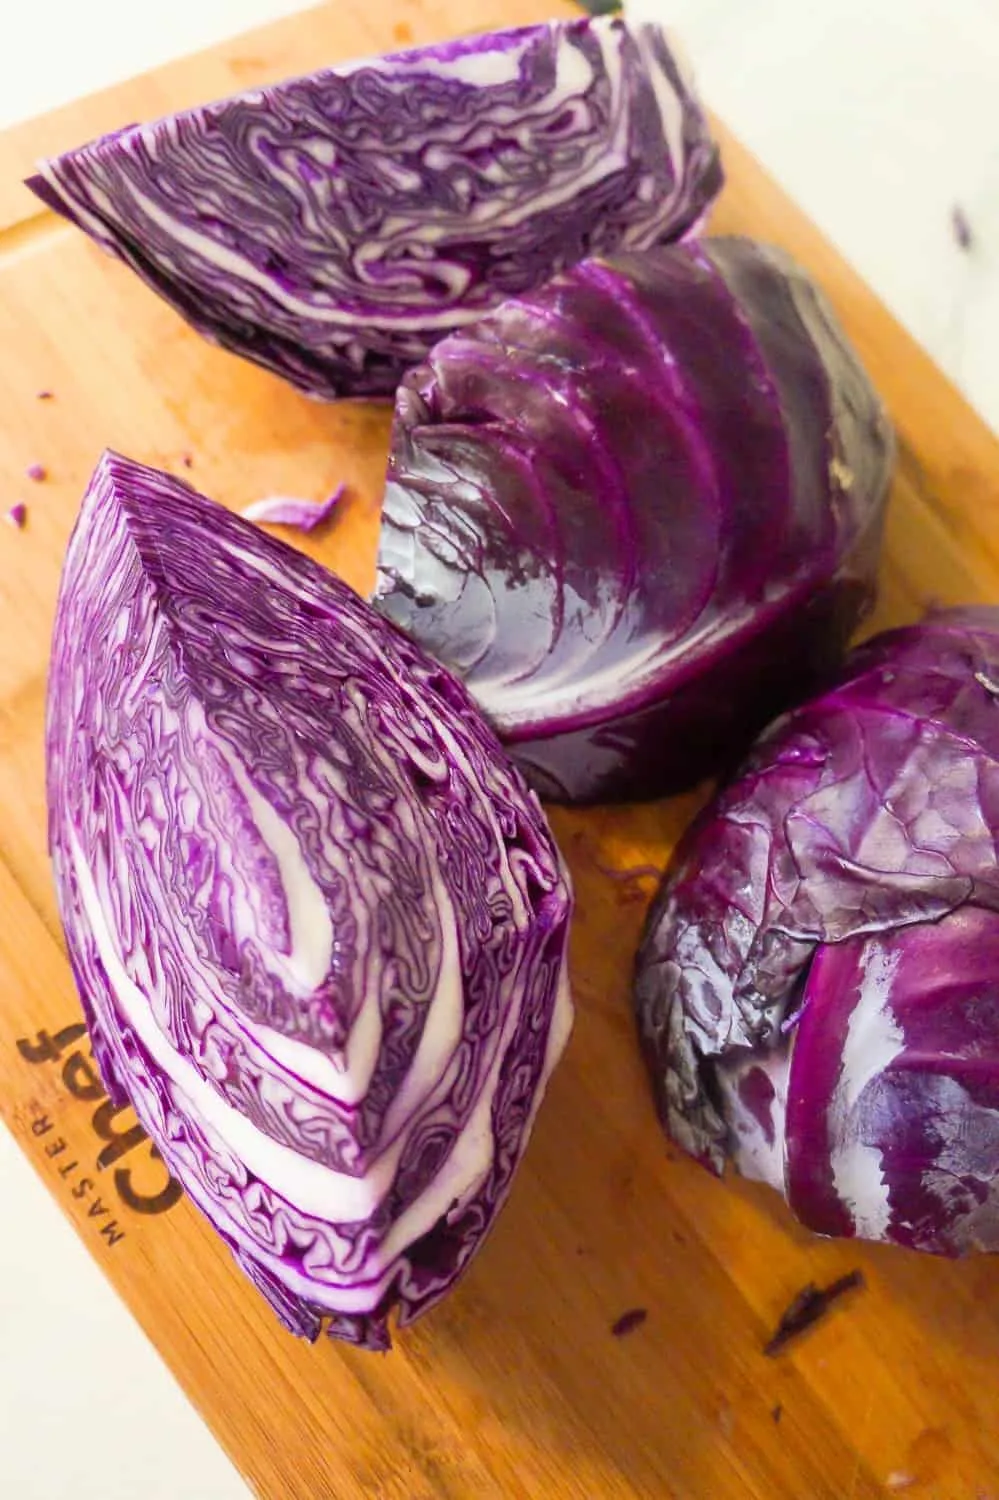 red cabbage cut into quarters